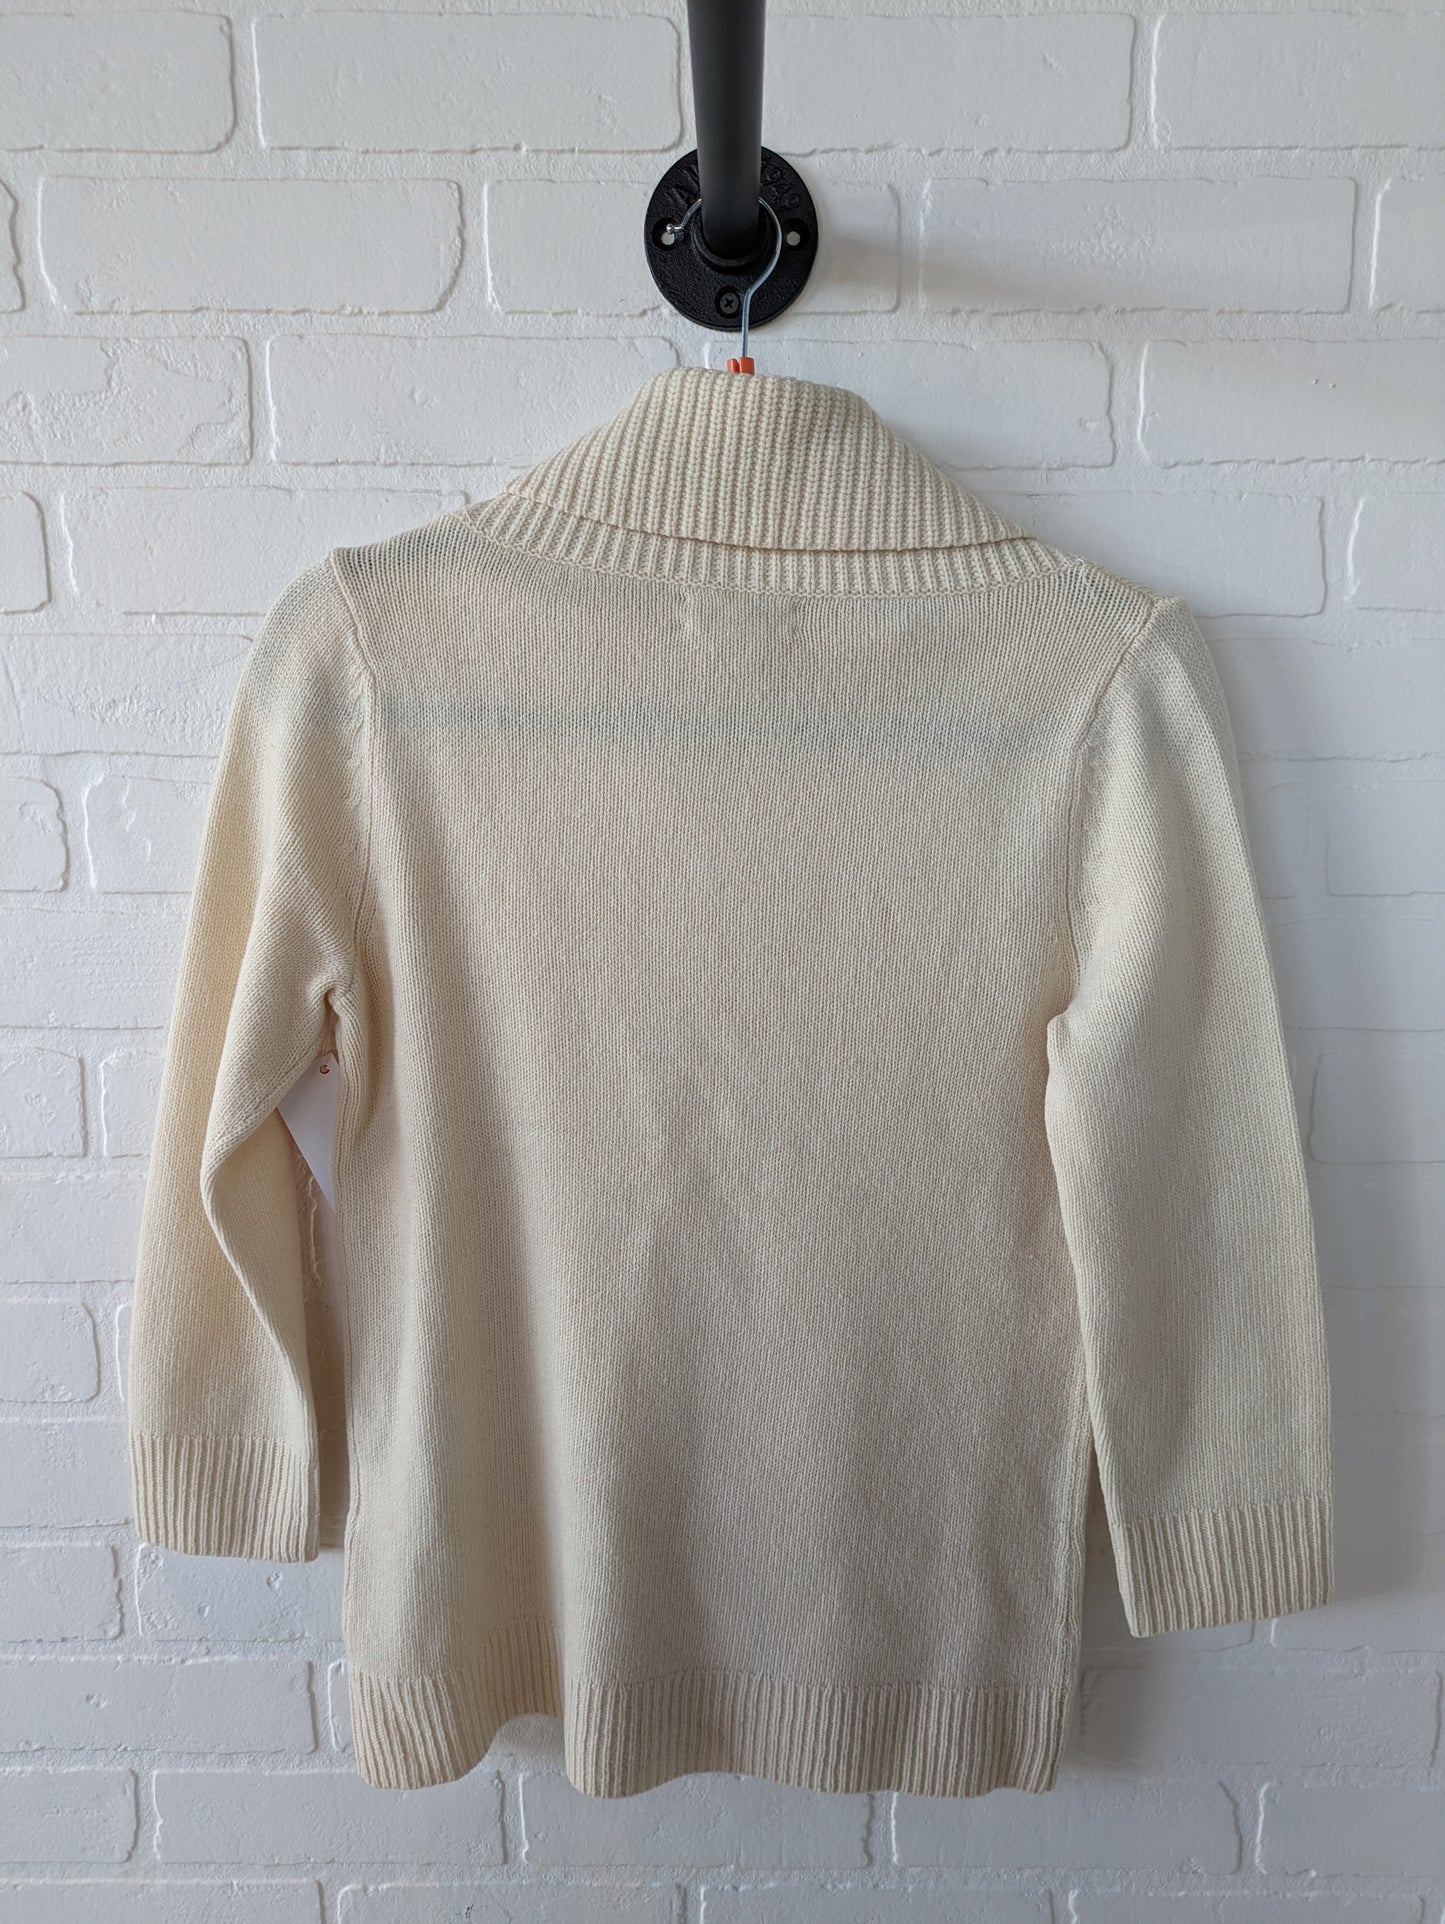 Sweater By Vineyard Vines  Size: S